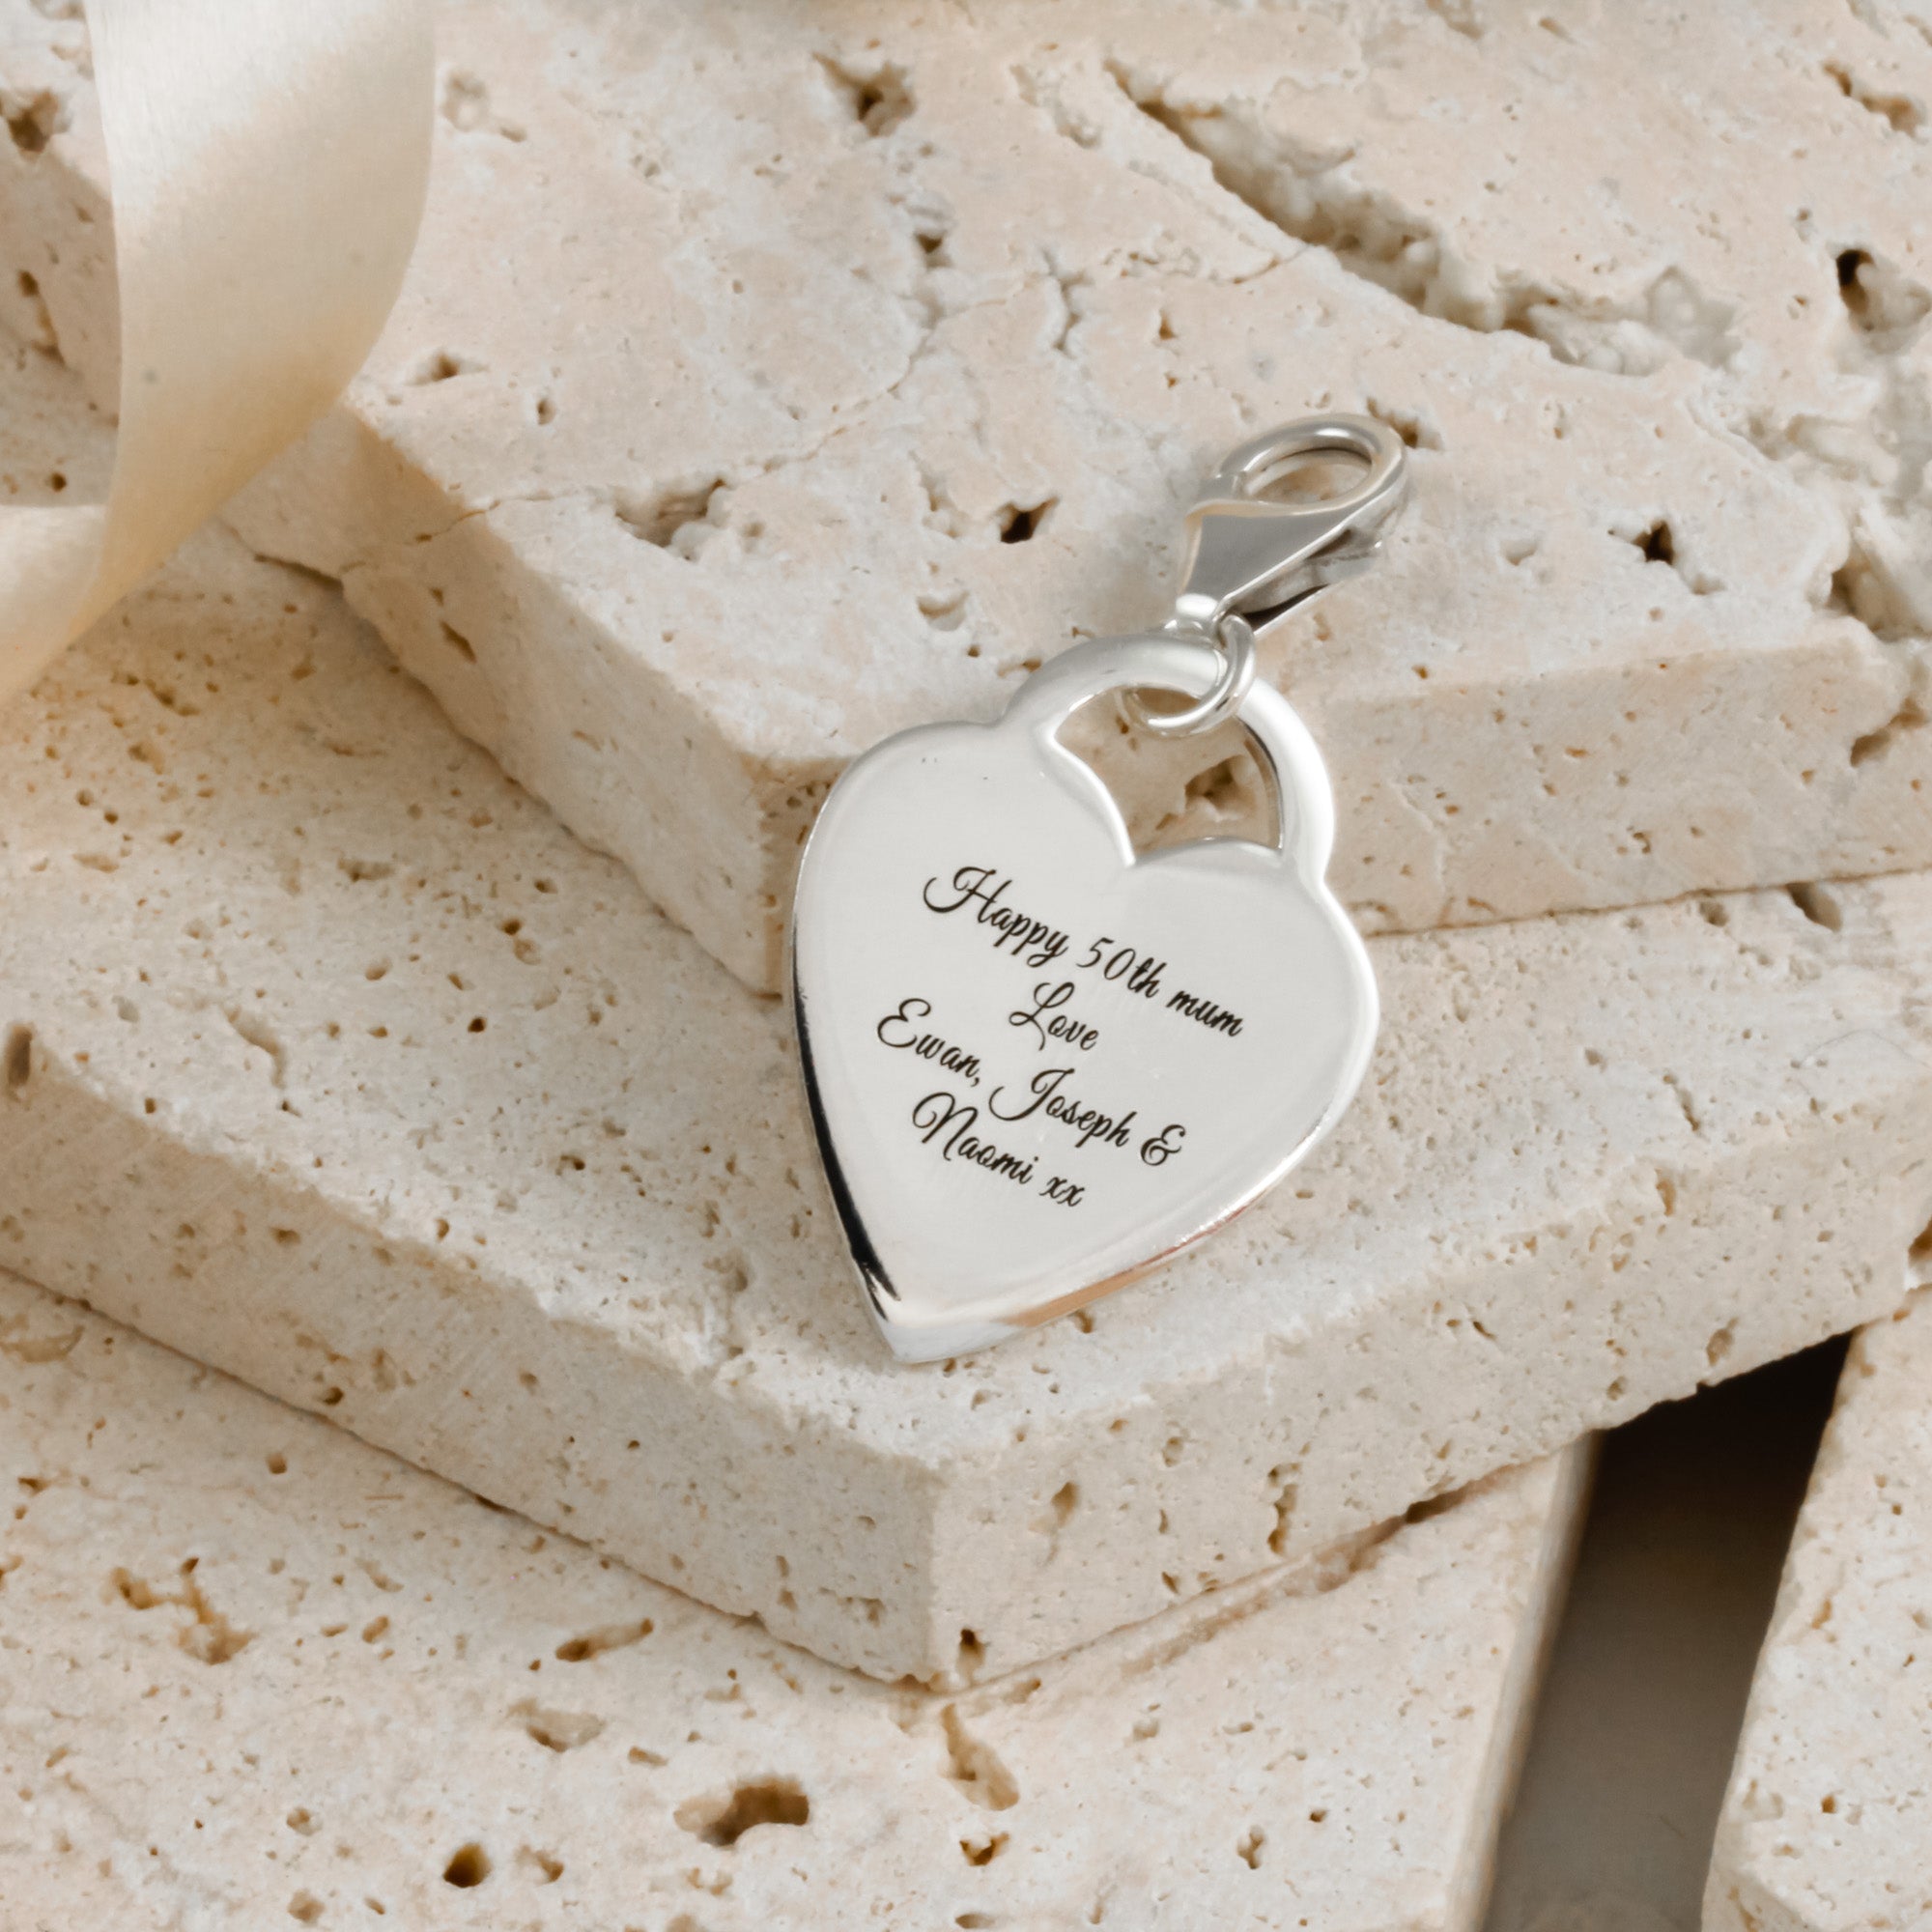 personalised heart tag large tiffany style silver charm for bracelet necklace